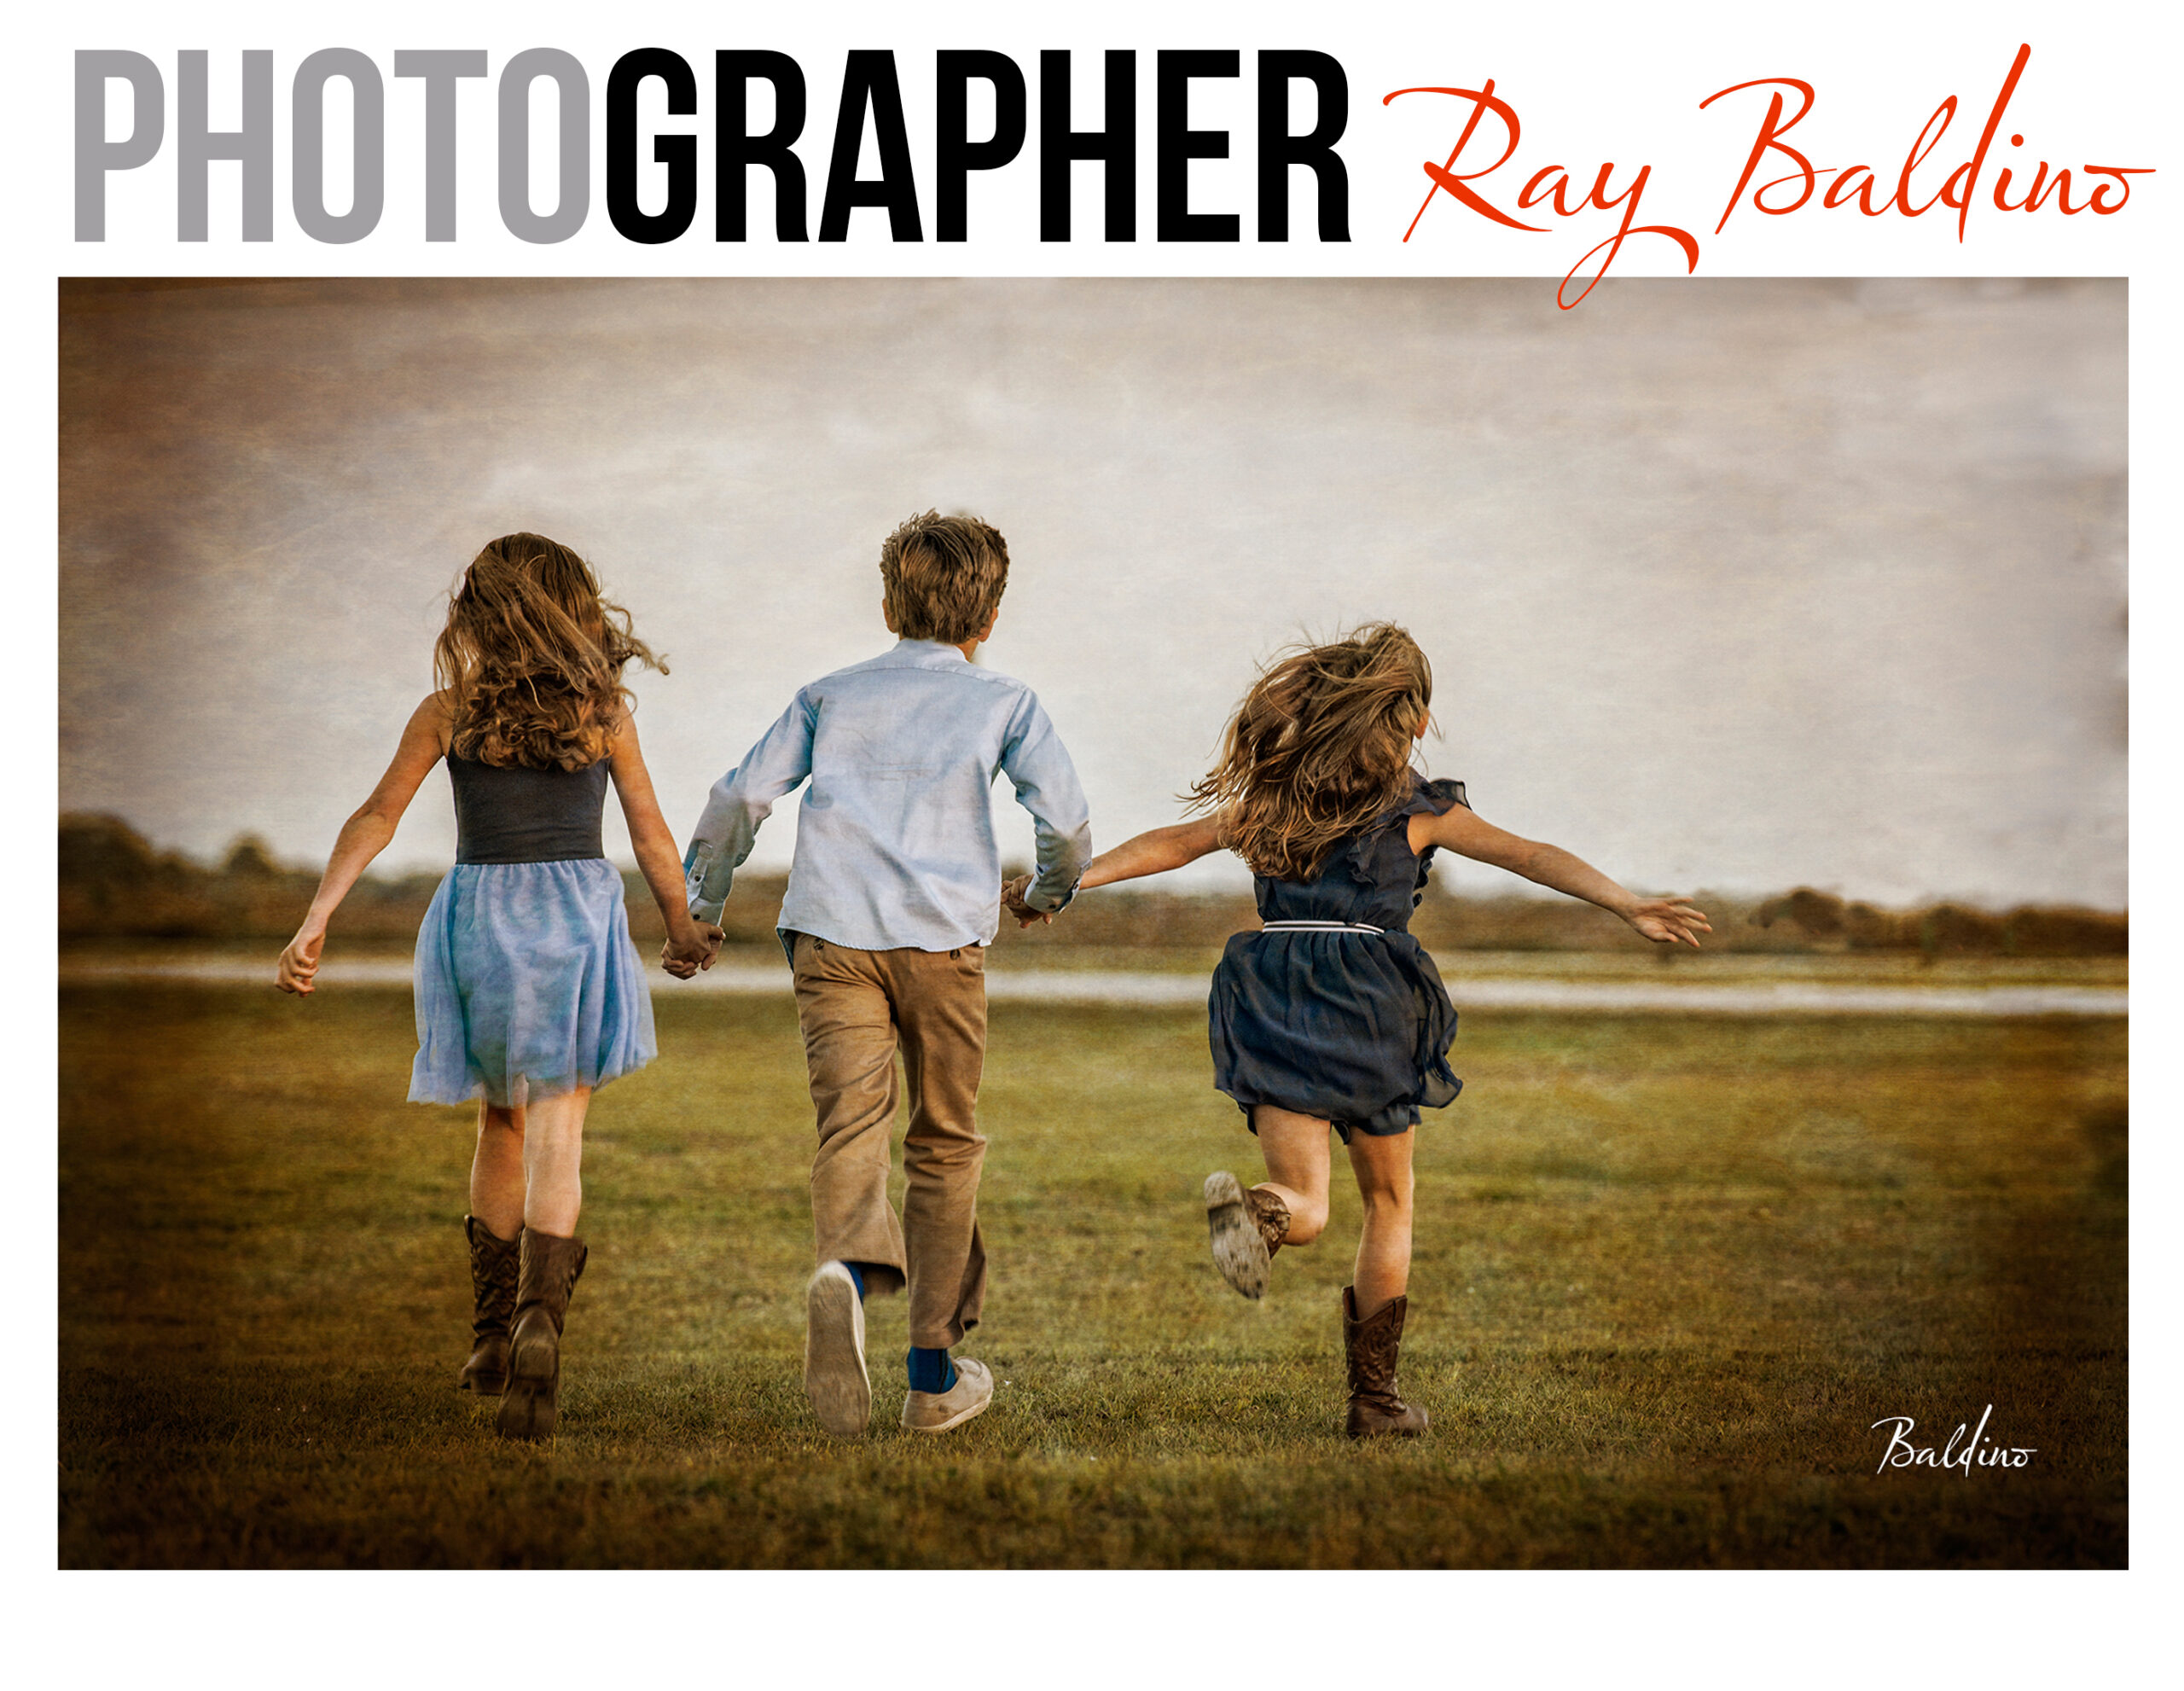 This_is_a_photograph_ogf_three_children_running_in_a_field-away_from_the _camera